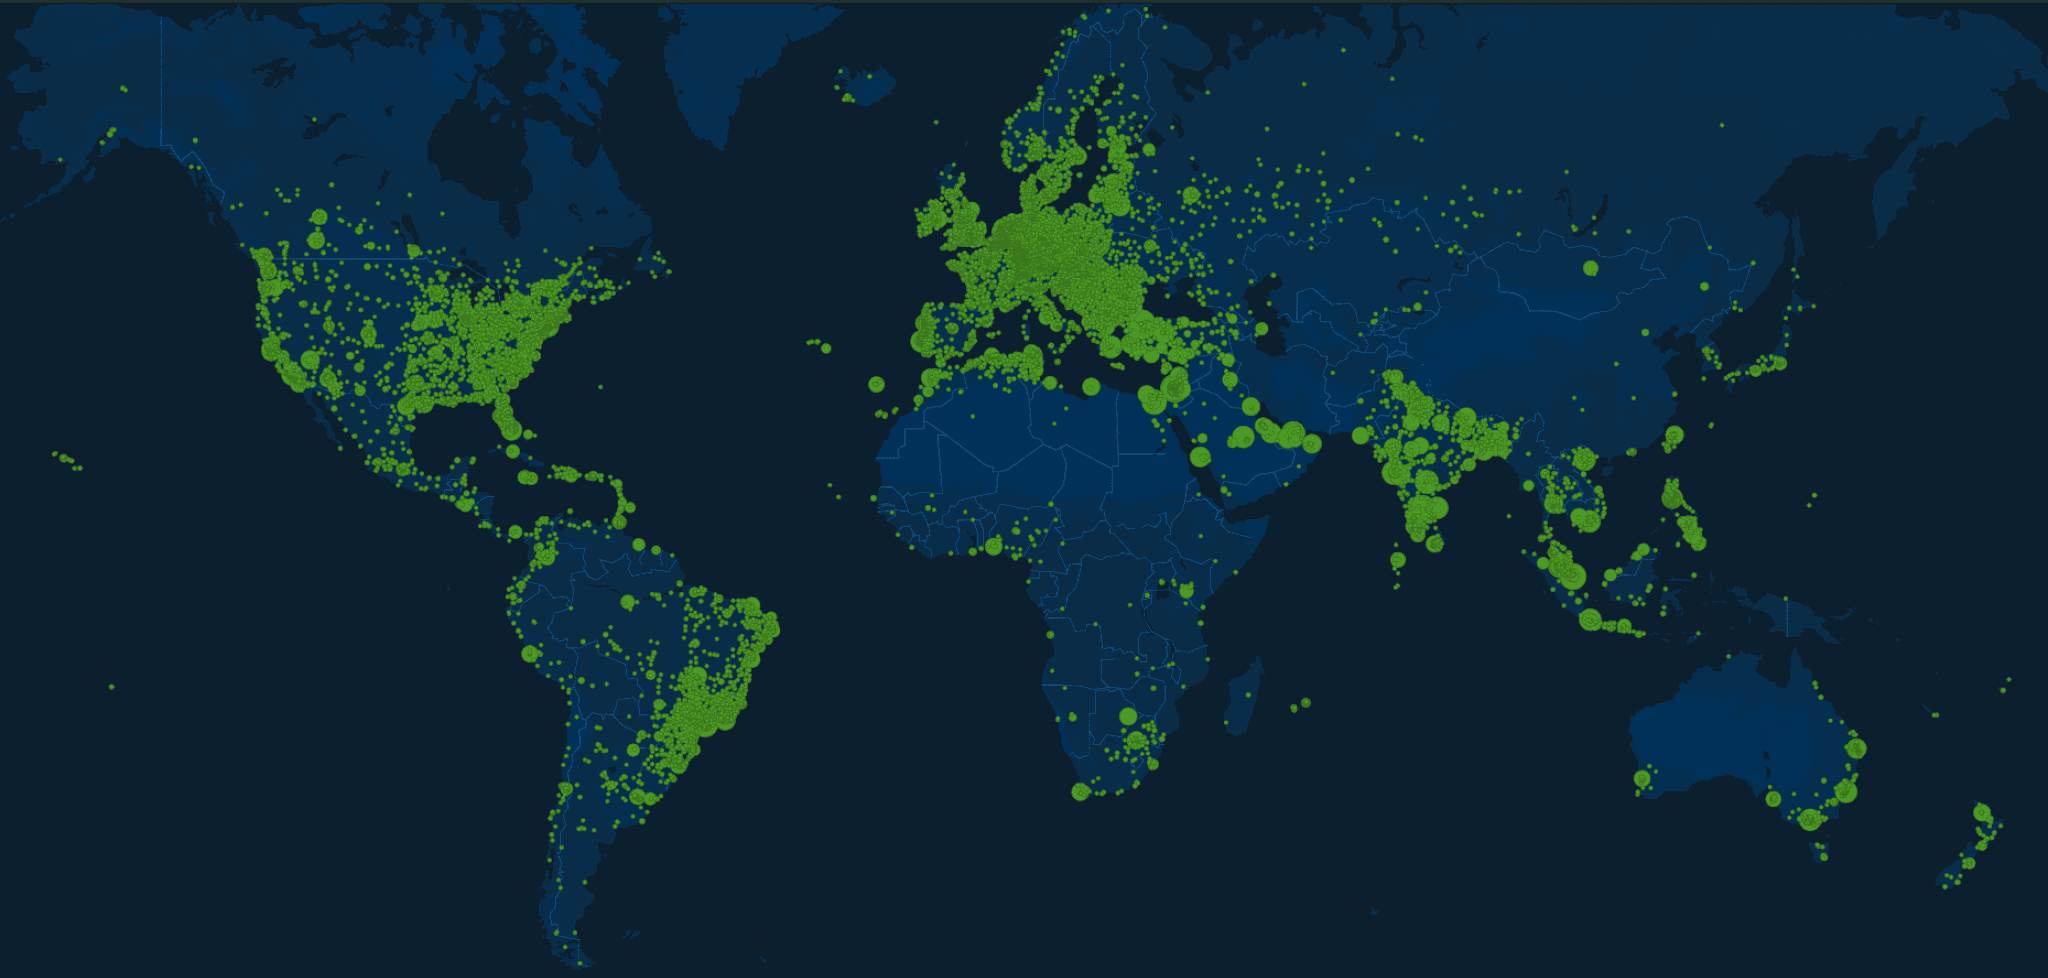 World map showing Salad Network nodes across 188 countries.